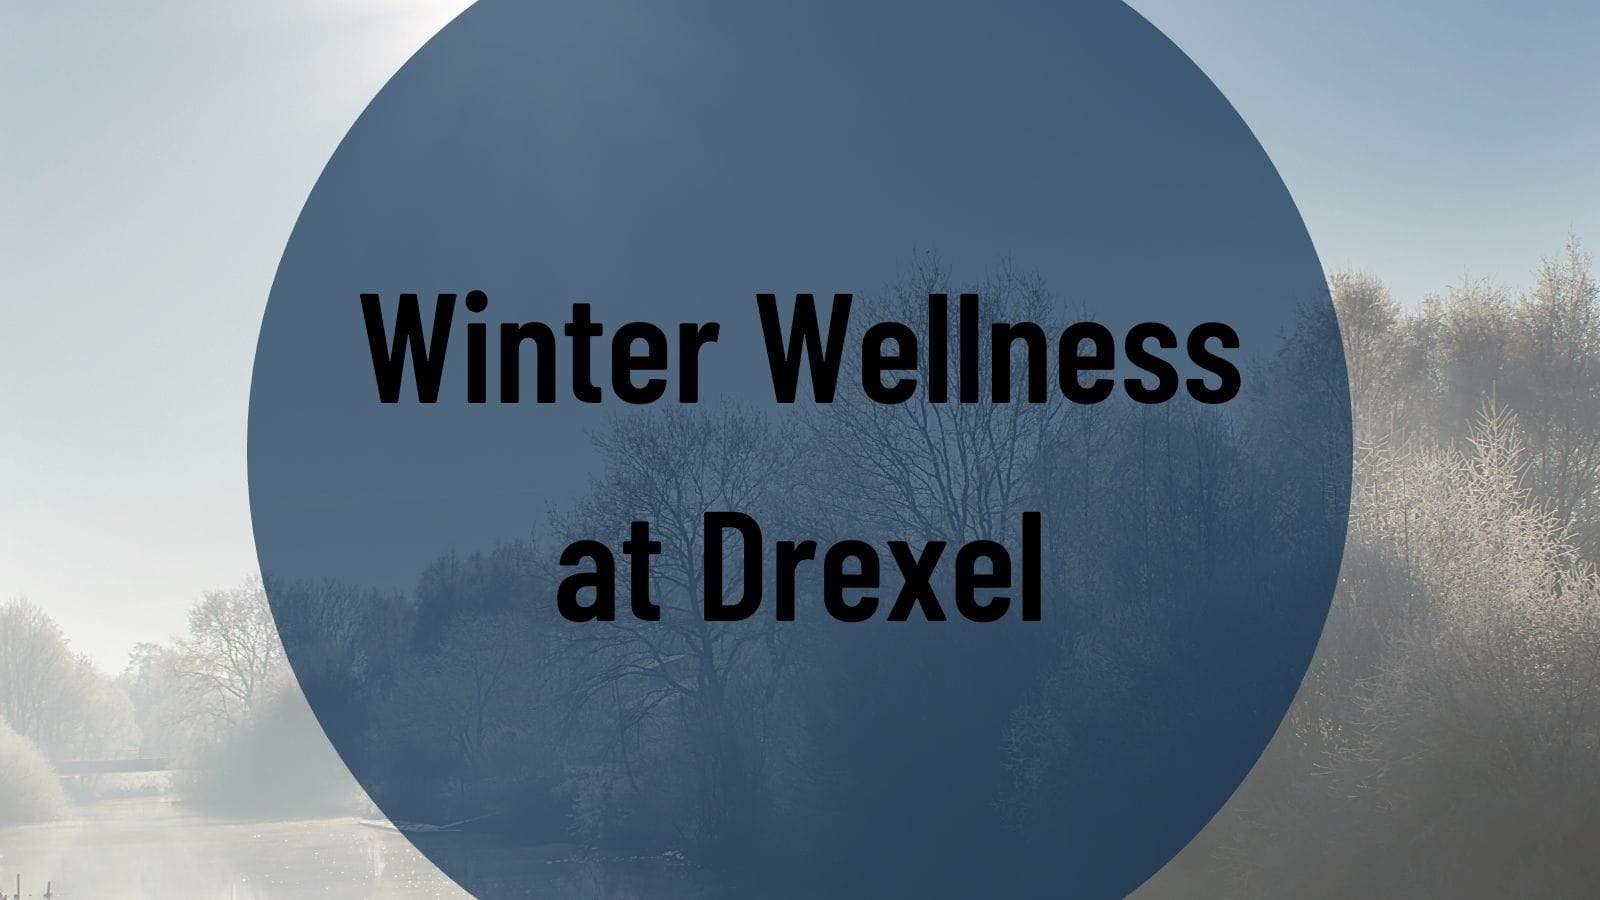 Winter Wellness at Drexel on a wintry background